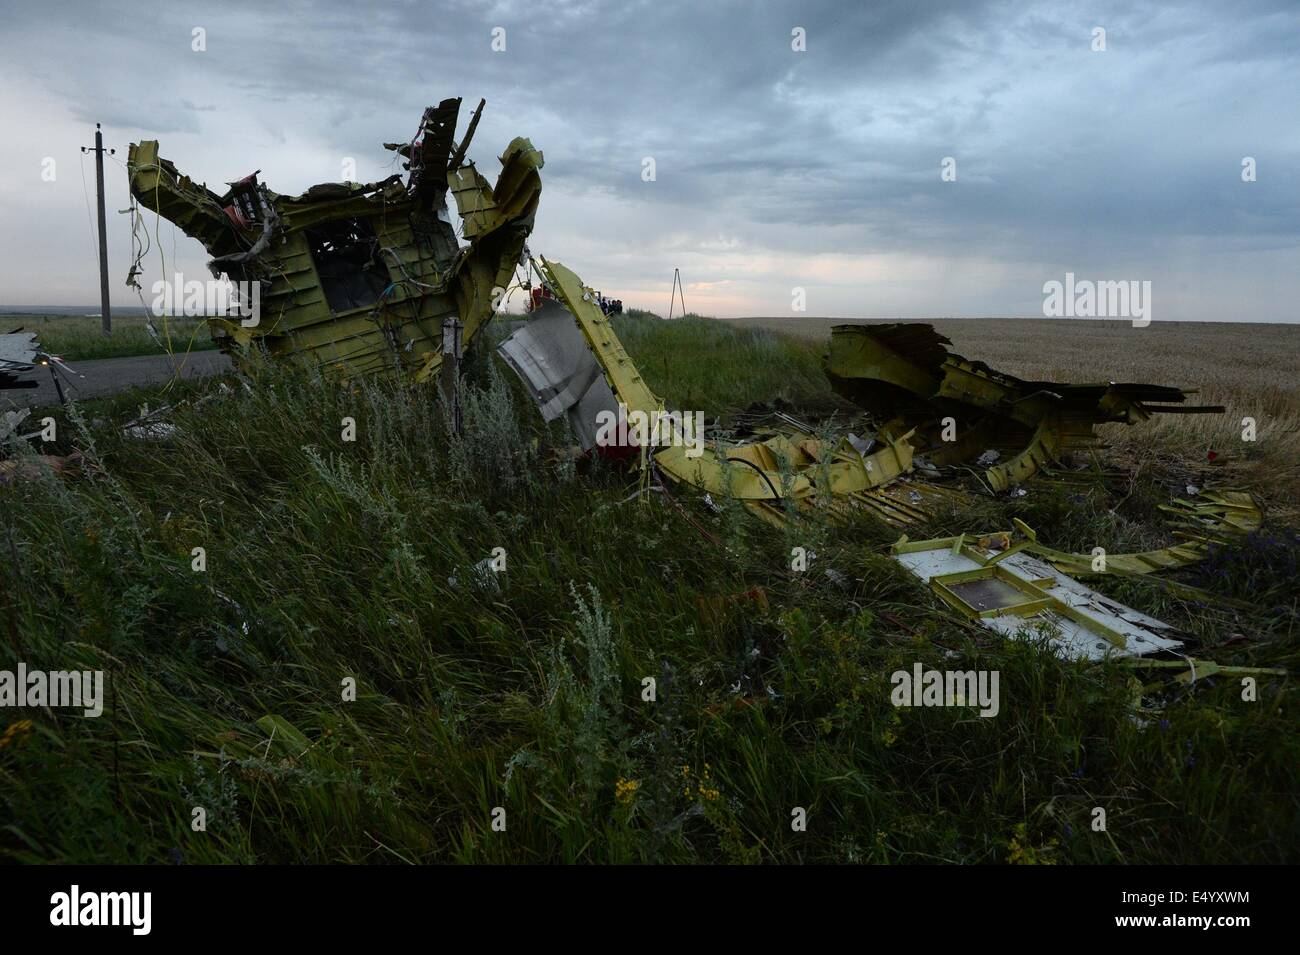 Grabovo, Ukraine. 17th July, 2014. Photo taken on July 17, 2014 shows the debris at the crash site of a passenger plane near the village of Grabovo, Ukraine. A Malaysian flight crashed Thursday in eastern Ukraine near the Russian border, with all the 280 passengers and 15 crew members on board reportedly having been killed. Credit:  RIA Novosti/Xinhua/Alamy Live News Stock Photo